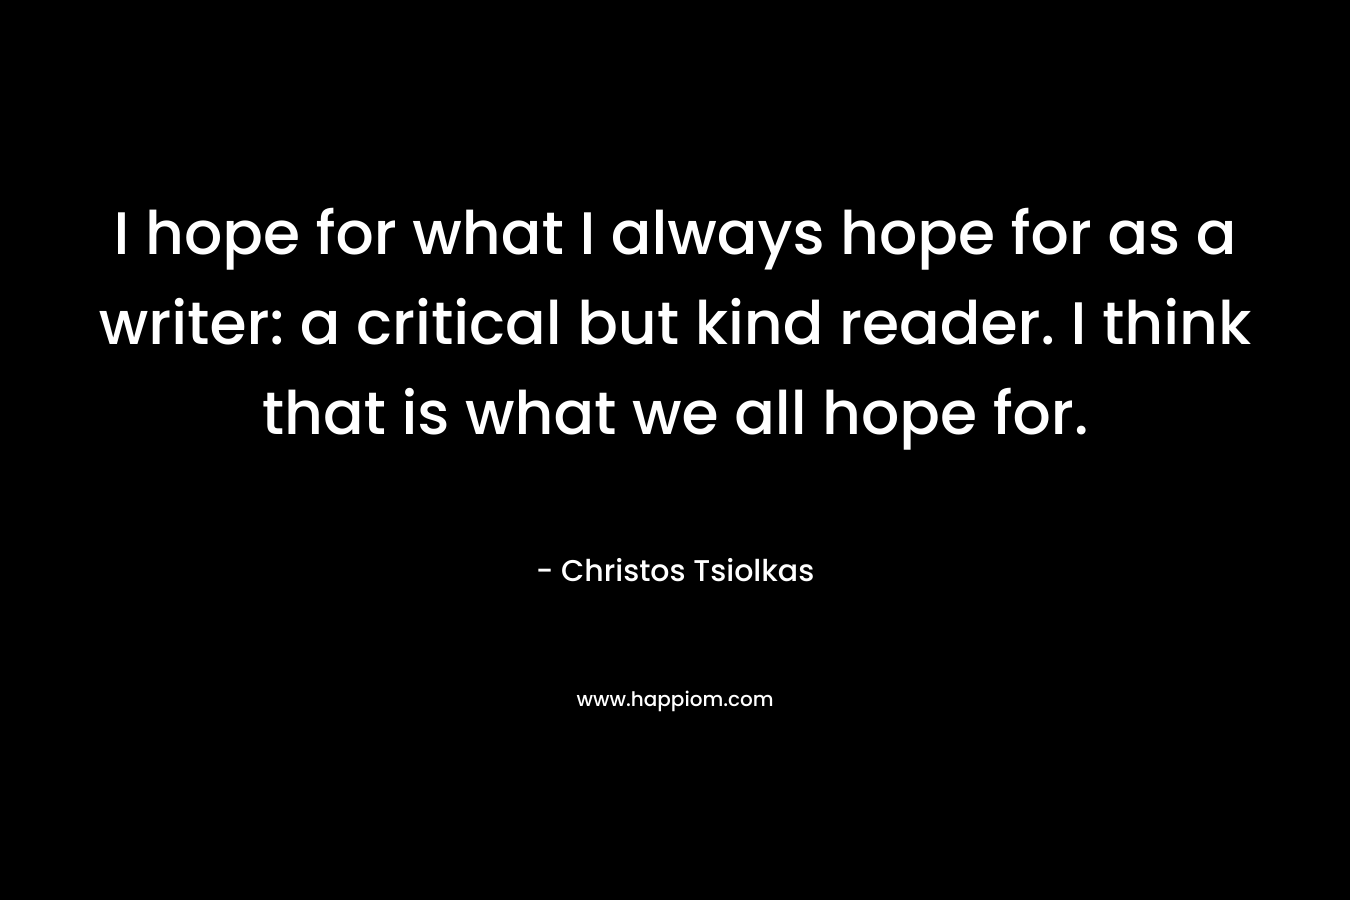 I hope for what I always hope for as a writer: a critical but kind reader. I think that is what we all hope for.